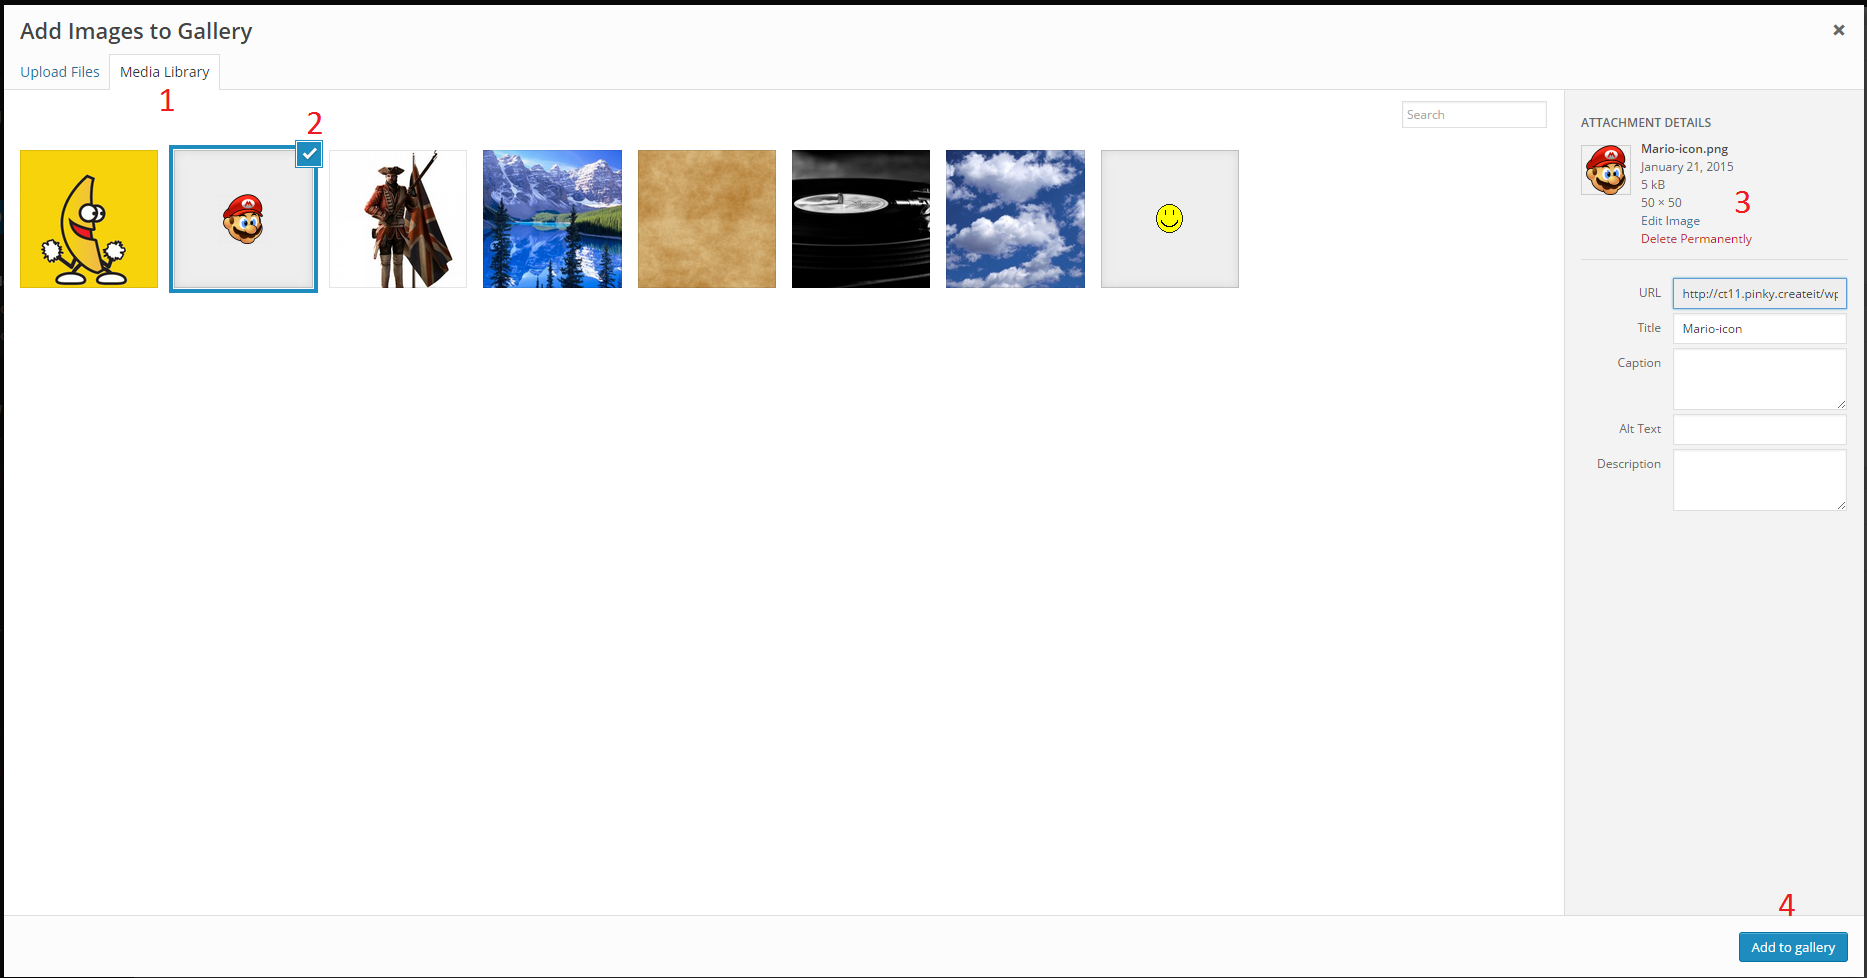 Select images from Media Library